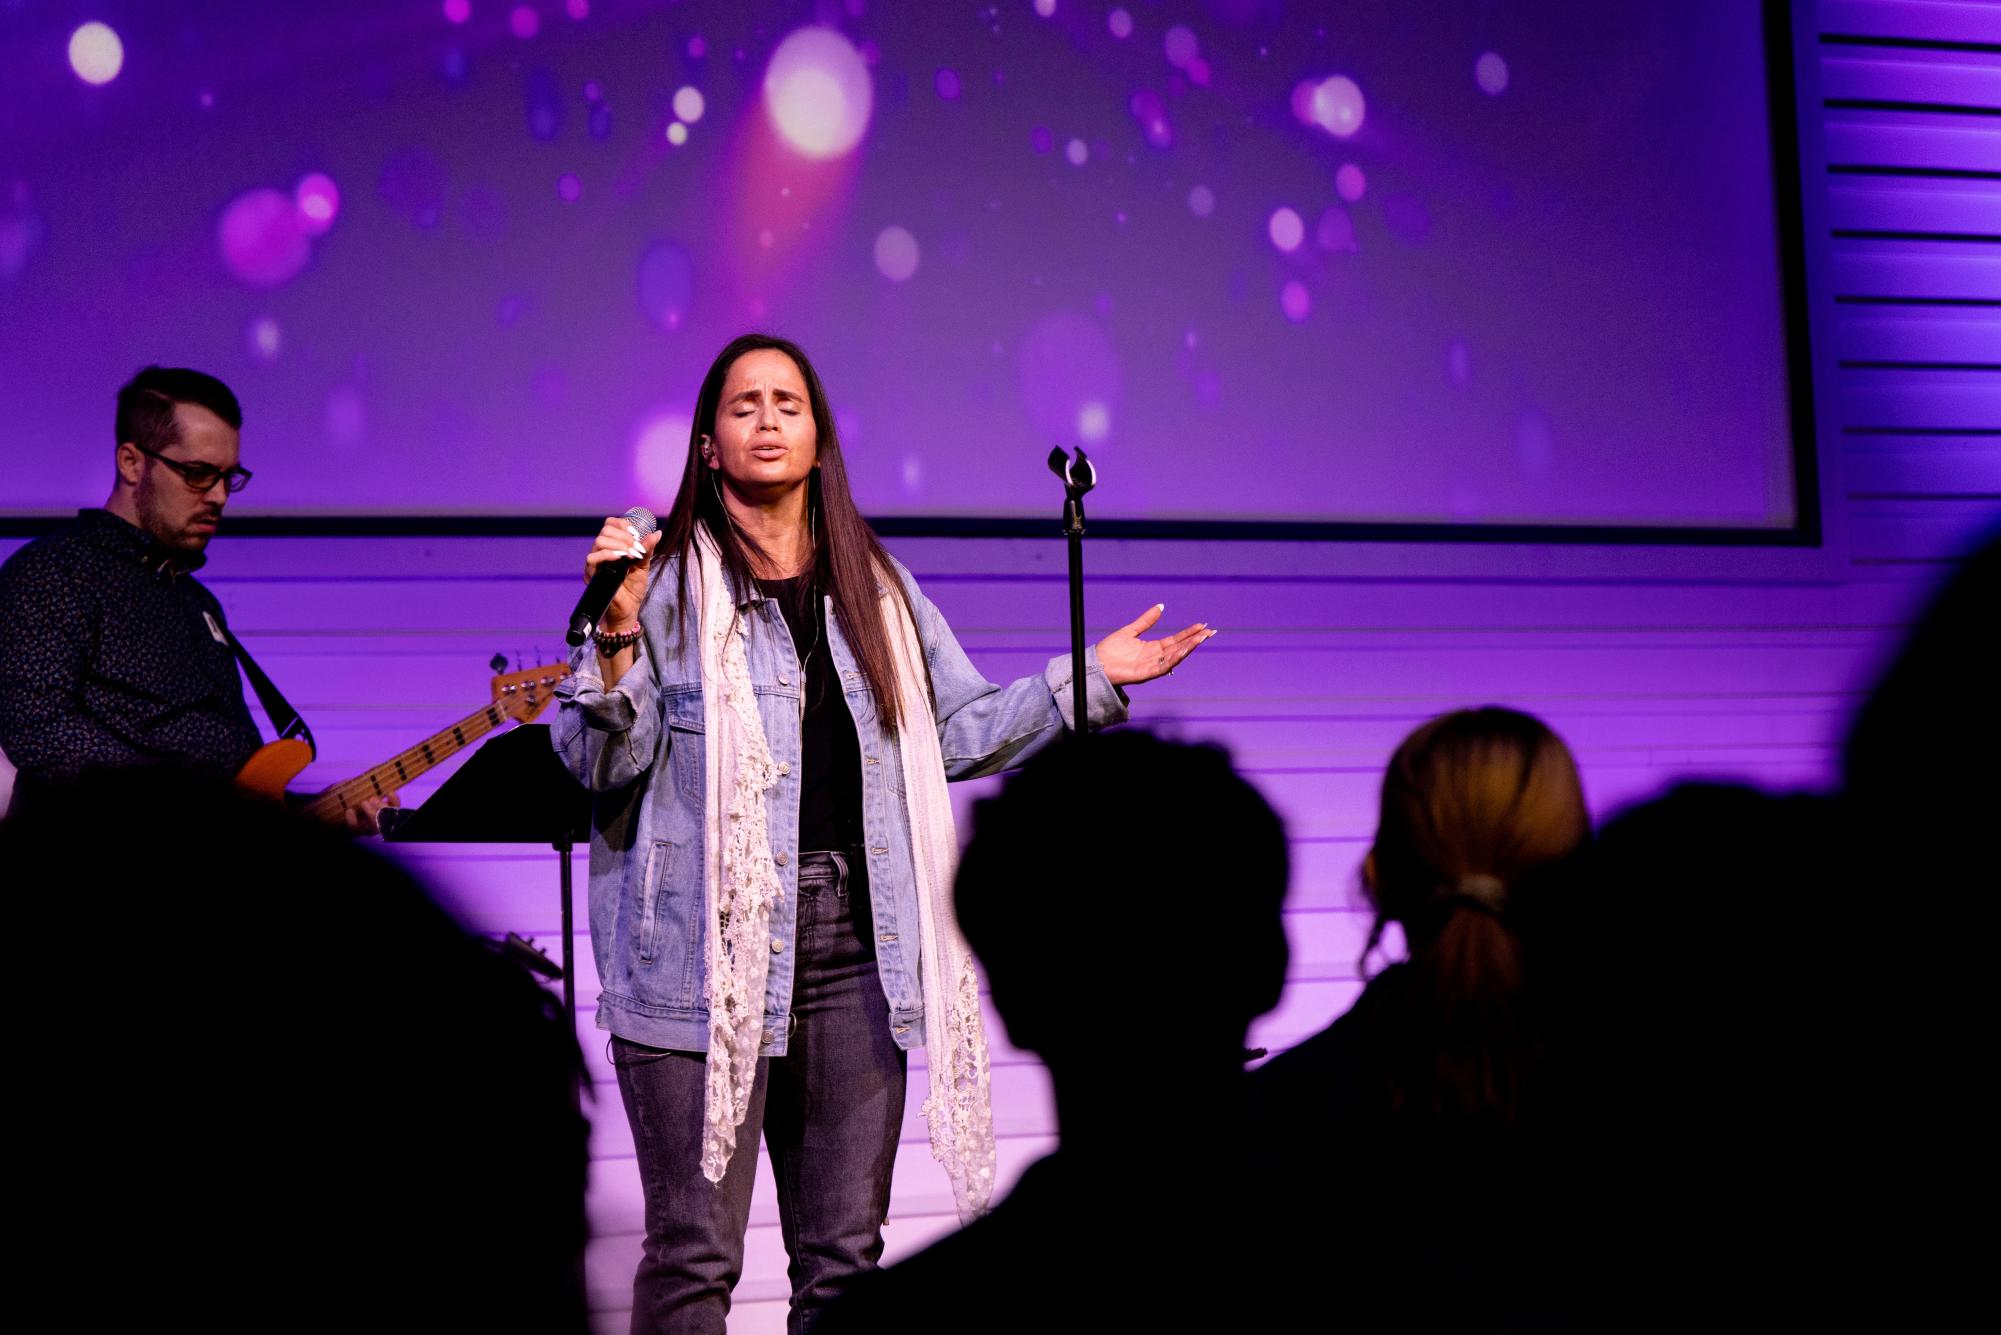 Spiritual Emphasis Week is all about breaking free of the ordinary, breaking free of the monotony that can plague traditional chapel services. To aid in this mission, One School of the Arts and Sciences invites to the stage a special worship team to evangelize to scholars.